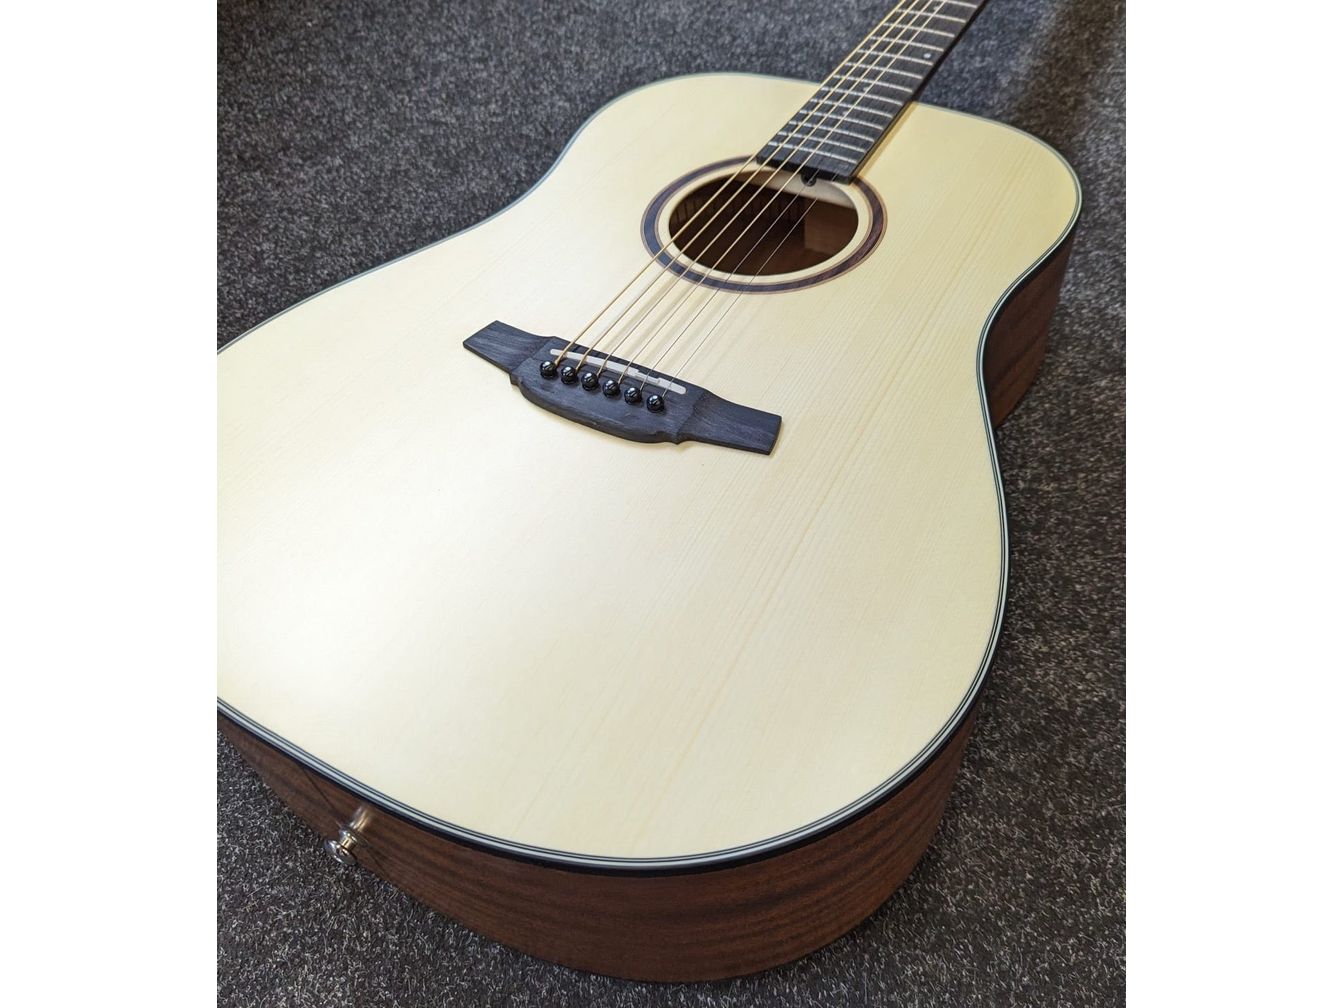 Crafter HD-100 Dreadnought Acoustic Guitar in Natural